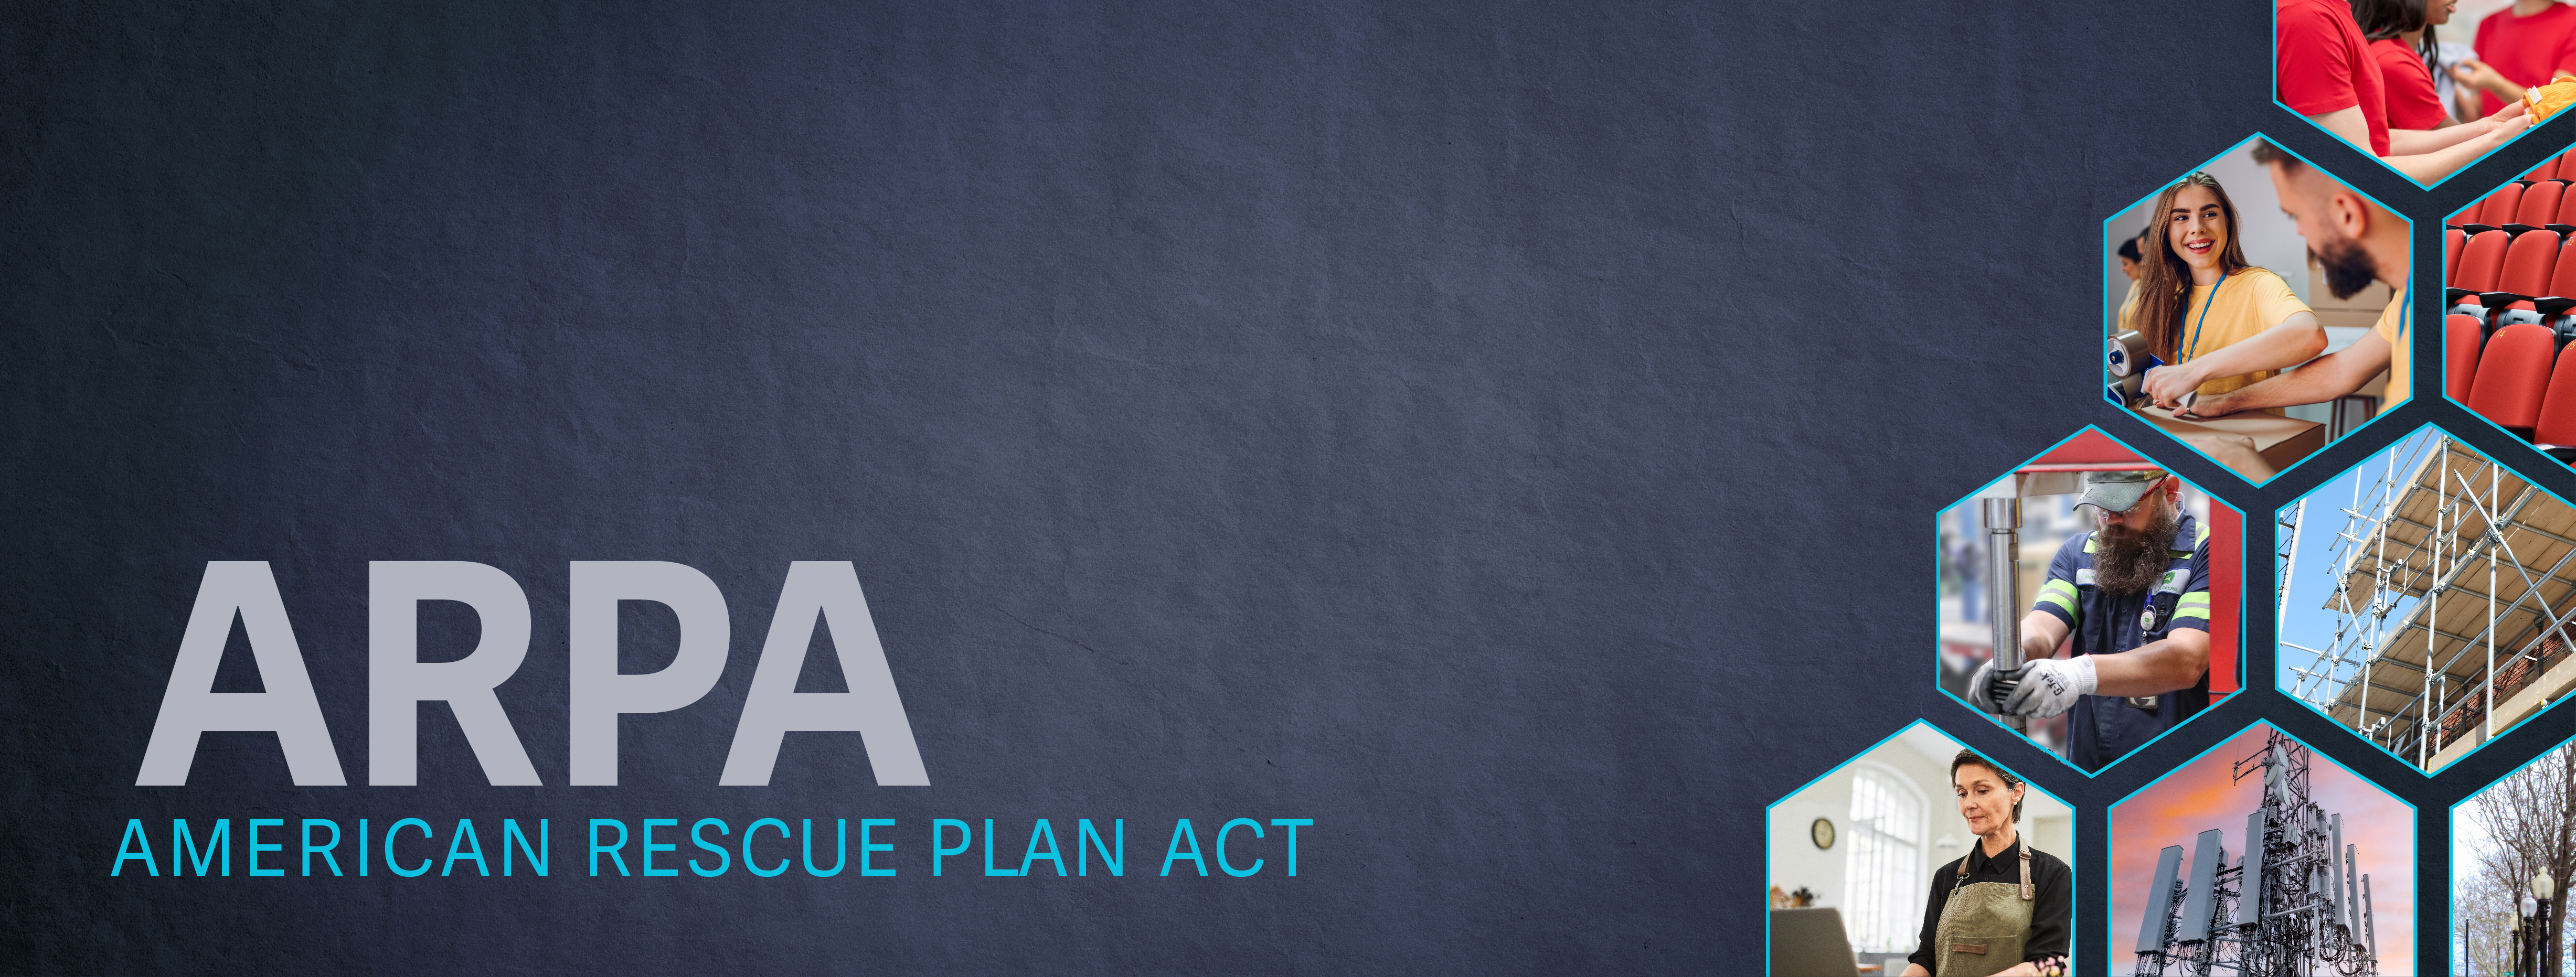 American Rescue Plan ACT (ARPA)